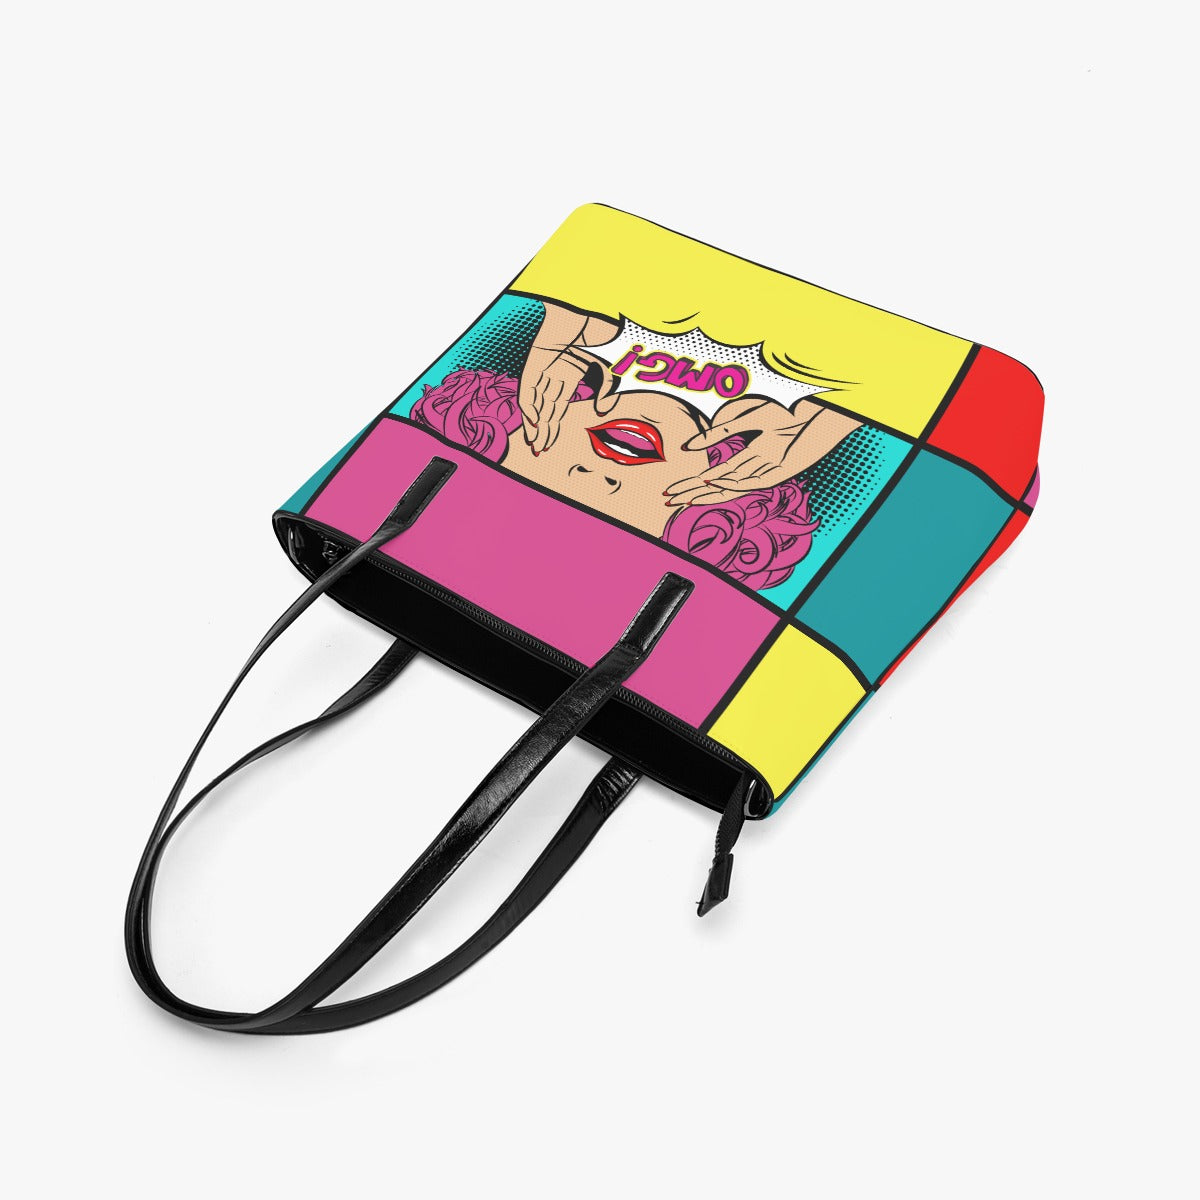 Tote Bag with shoulder straps and Pop Art Pattern Print